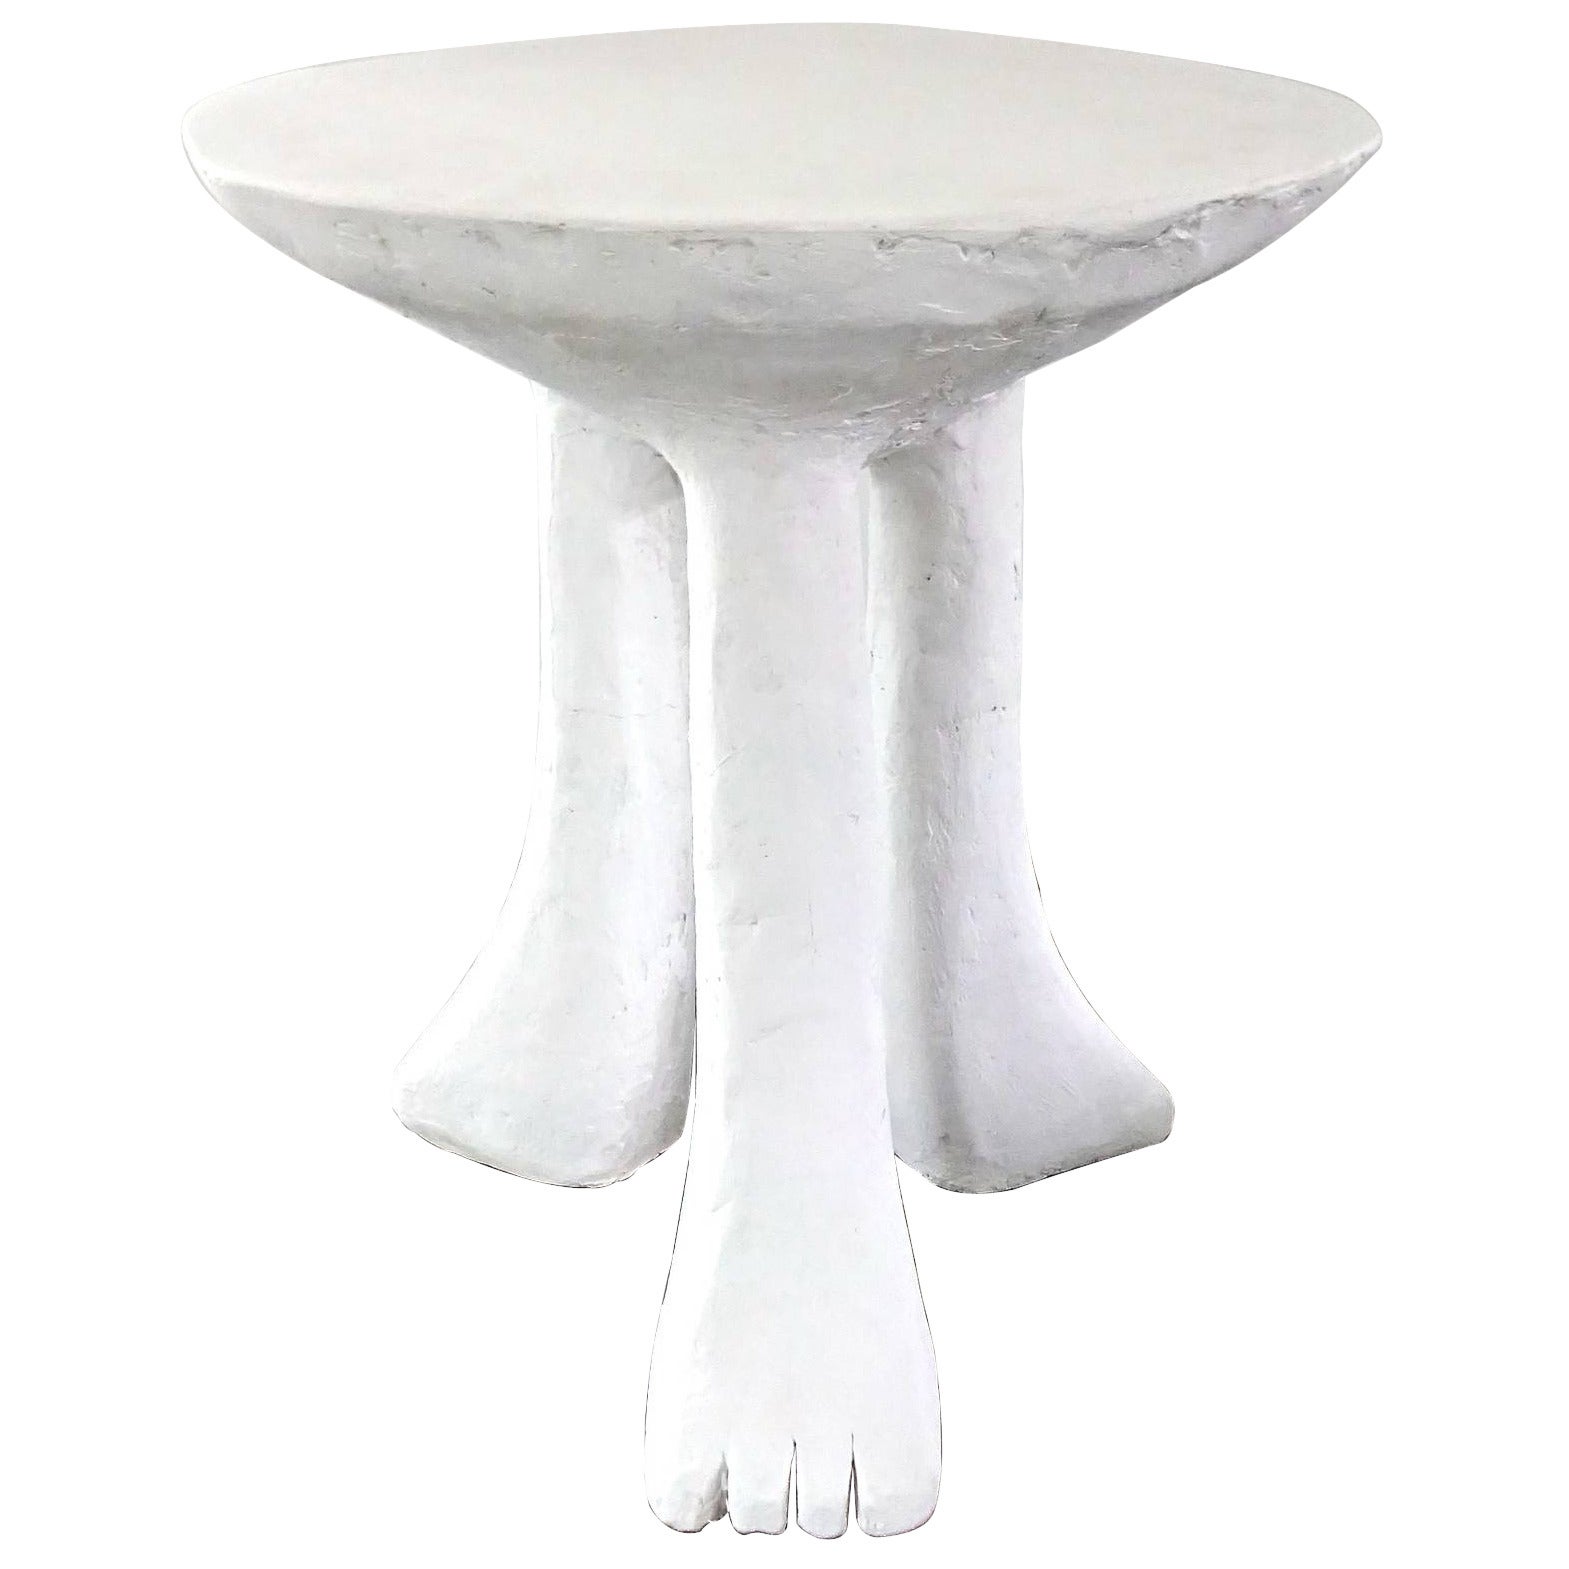 Iconic 1970s John Dickinson Plaster "Africa" End Table For Sale